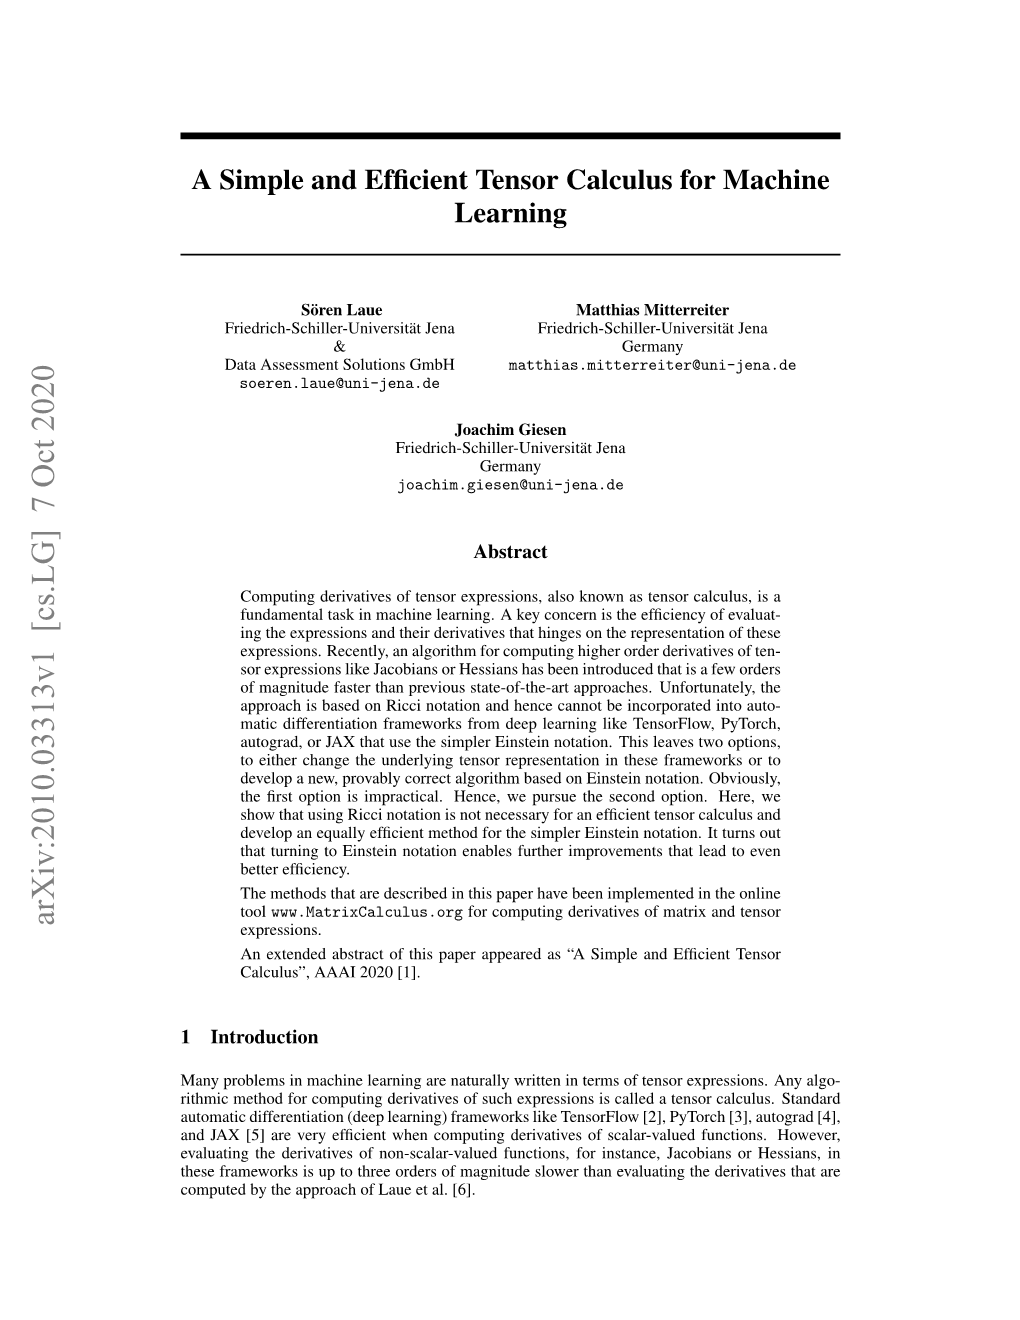 A Simple and Efficient Tensor Calculus for Machine Learning